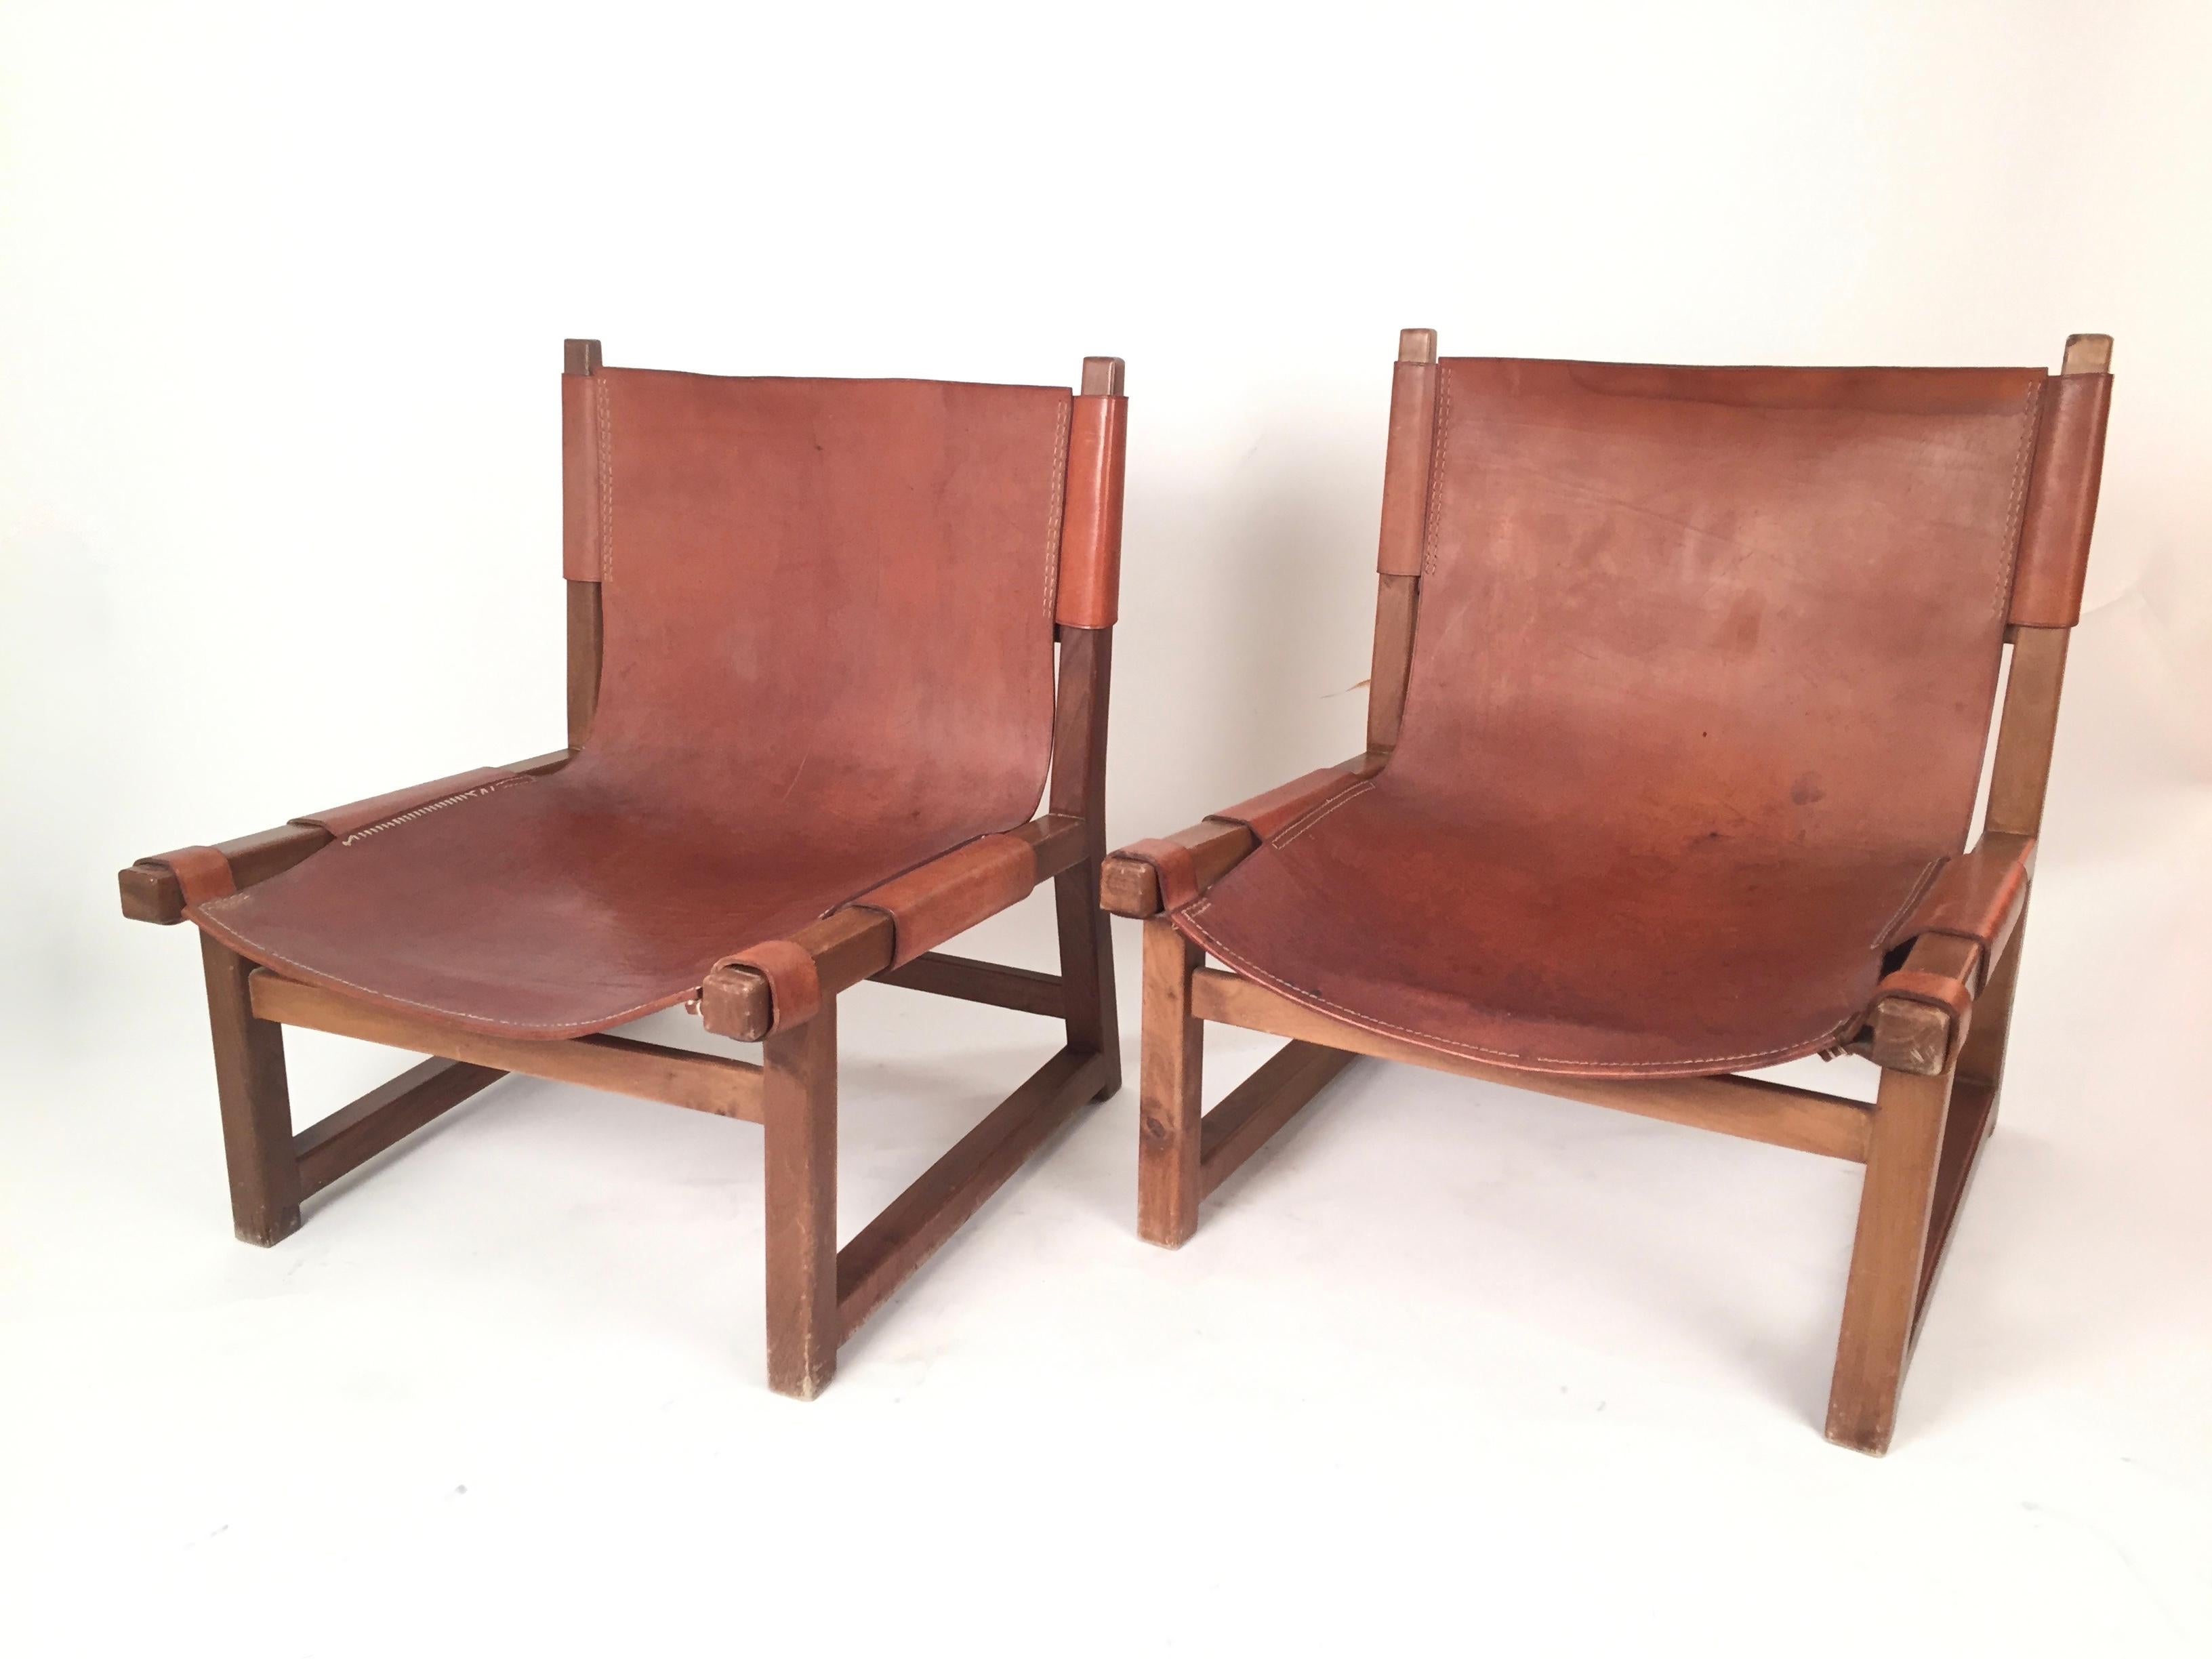 A pair of hunting lodge chairs designed for the Madrid Campo Club by the Spanish designer ,Paco Muñoz and edited by f Darro in 1960.
An exclusive example of Spanish Mid-Century design.